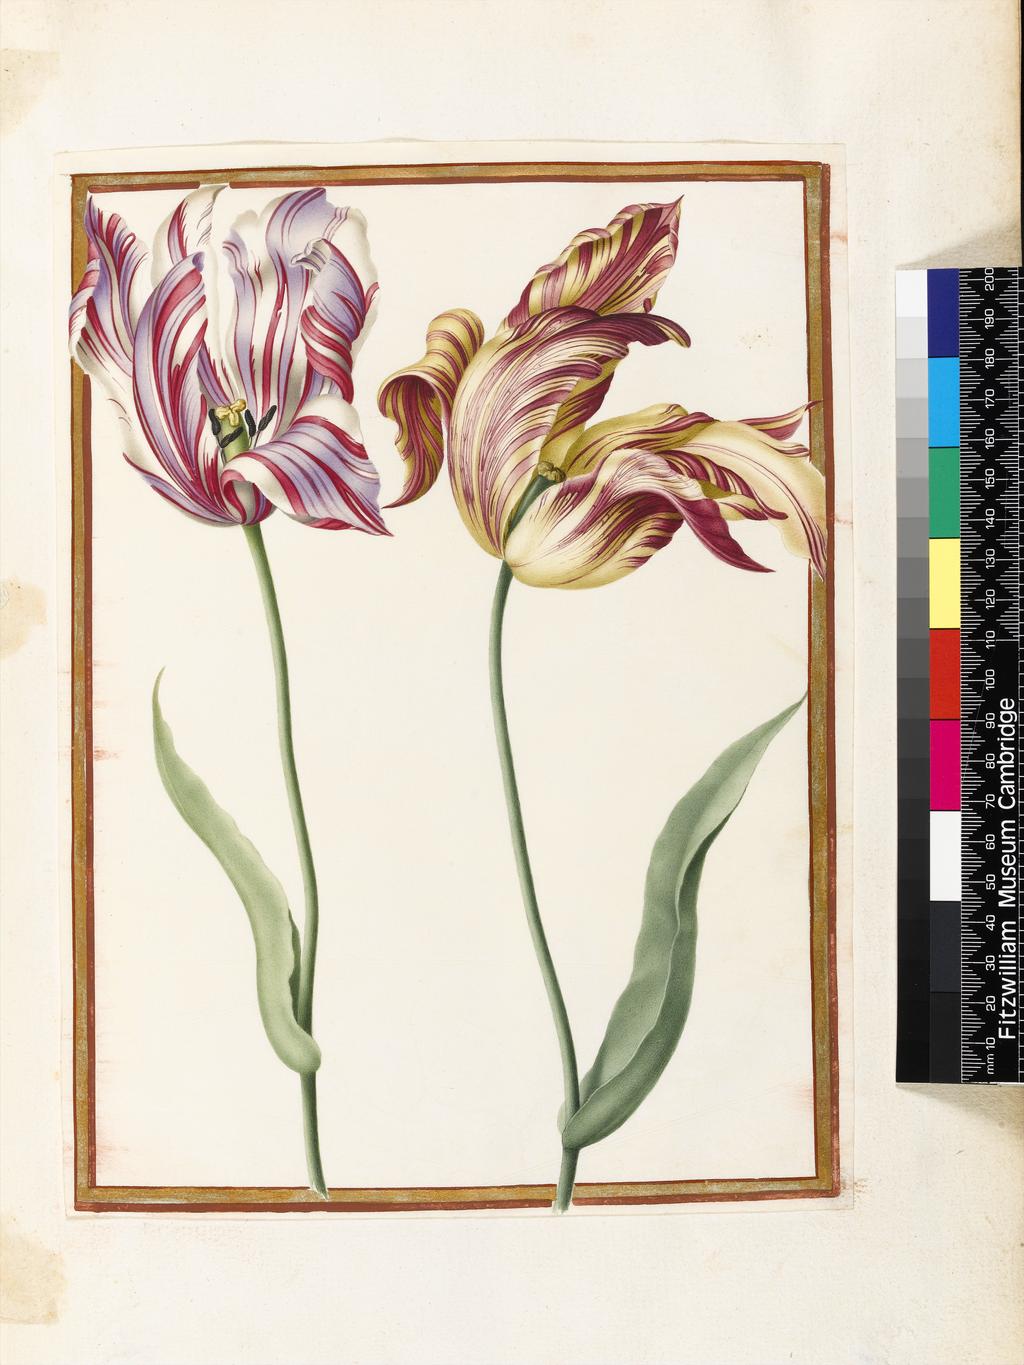 An image of Two 'broken' Tulips. Robert, Nicolas attributed to (French, 1614-1685). Watercolour and bodycolour on vellum, height 267 mm, width 198 mm. Album containing 62 botanical drawings on vellum tipped in on the gilt-edged pages of the album which bear the watermark of an 18th century French paper-maker, Malmenayde of Thiers (active from 1731). Bound in red morocco with clasps, the spine tooled in gilt. The Pages are interleaved with thin protective paper. Ruled lines of red and gold border the drawings on all sides. 17th Century. French.